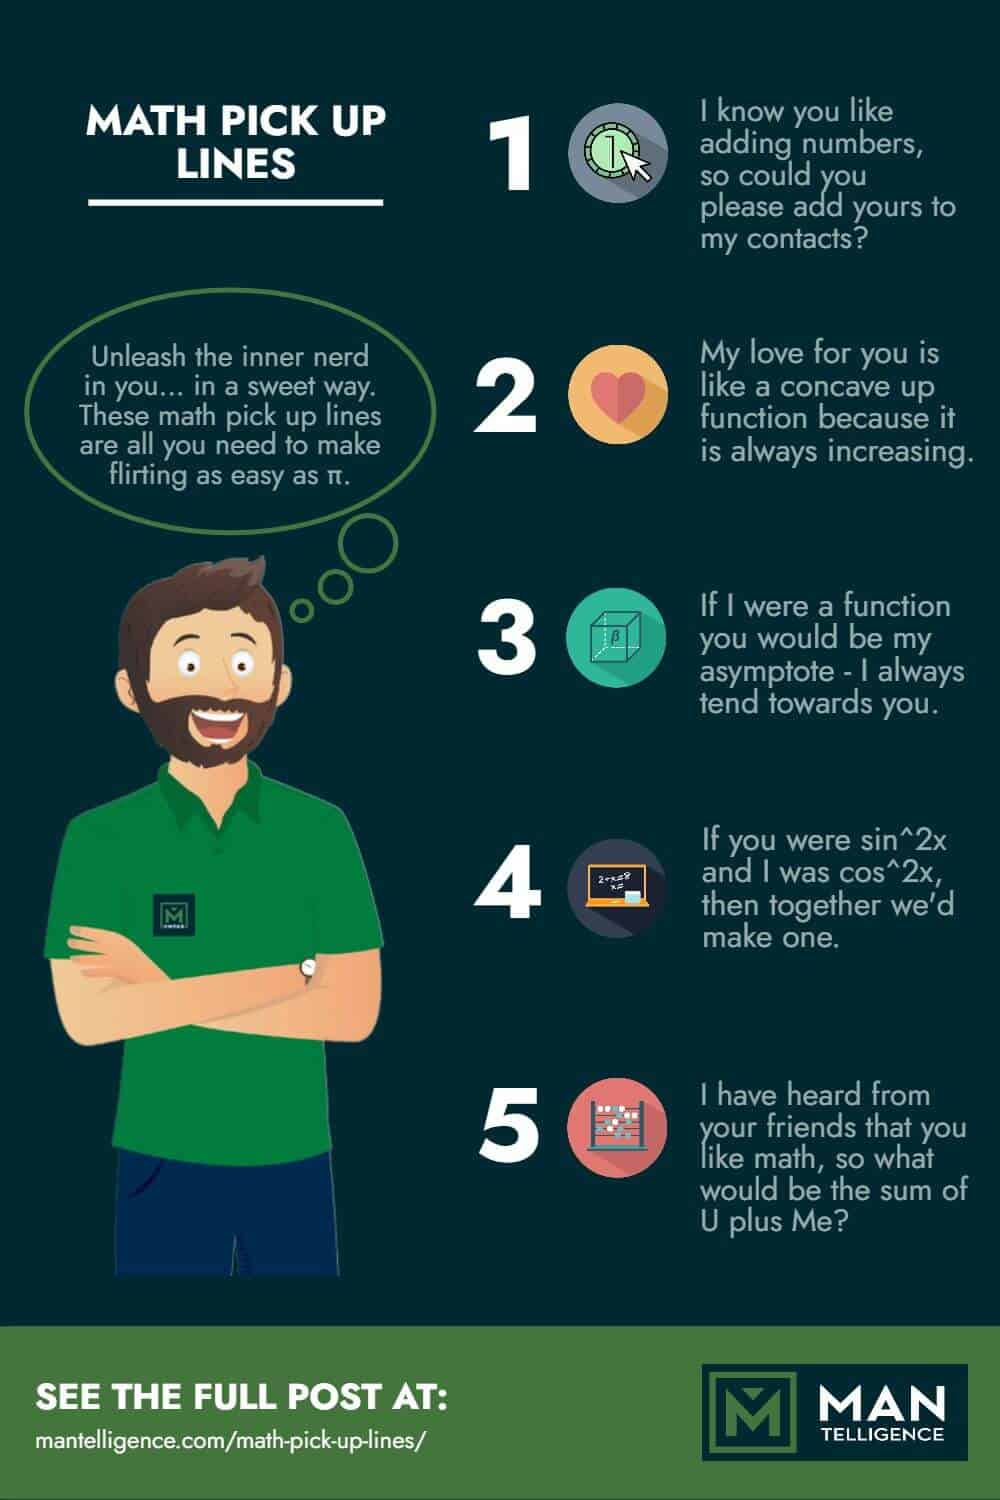 Math pick up lines - Infographic